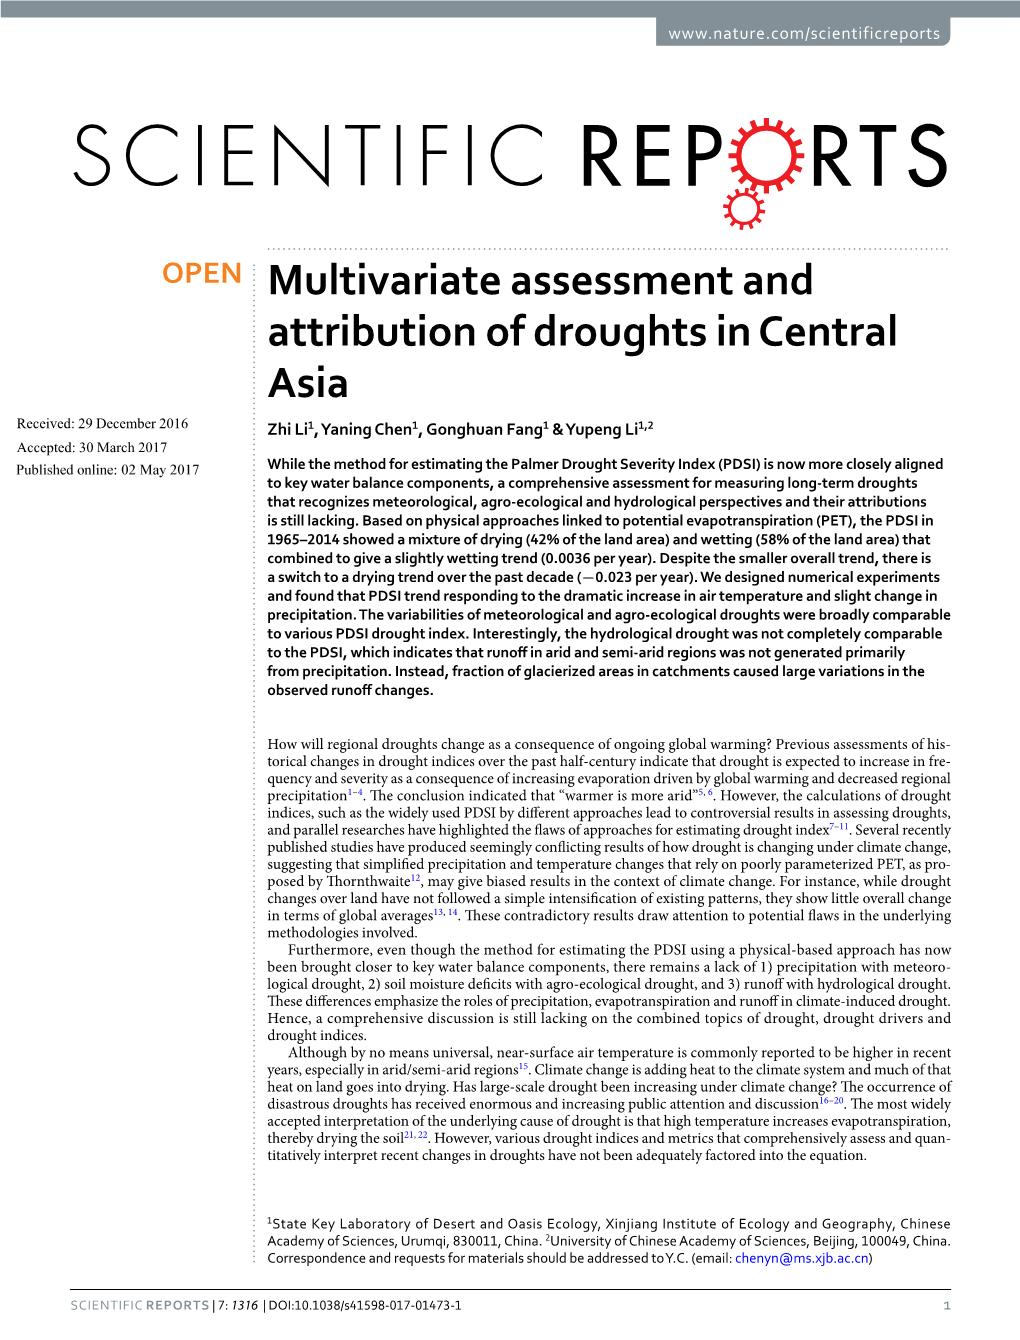 Multivariate Assessment and Attribution of Droughts in Central Asia